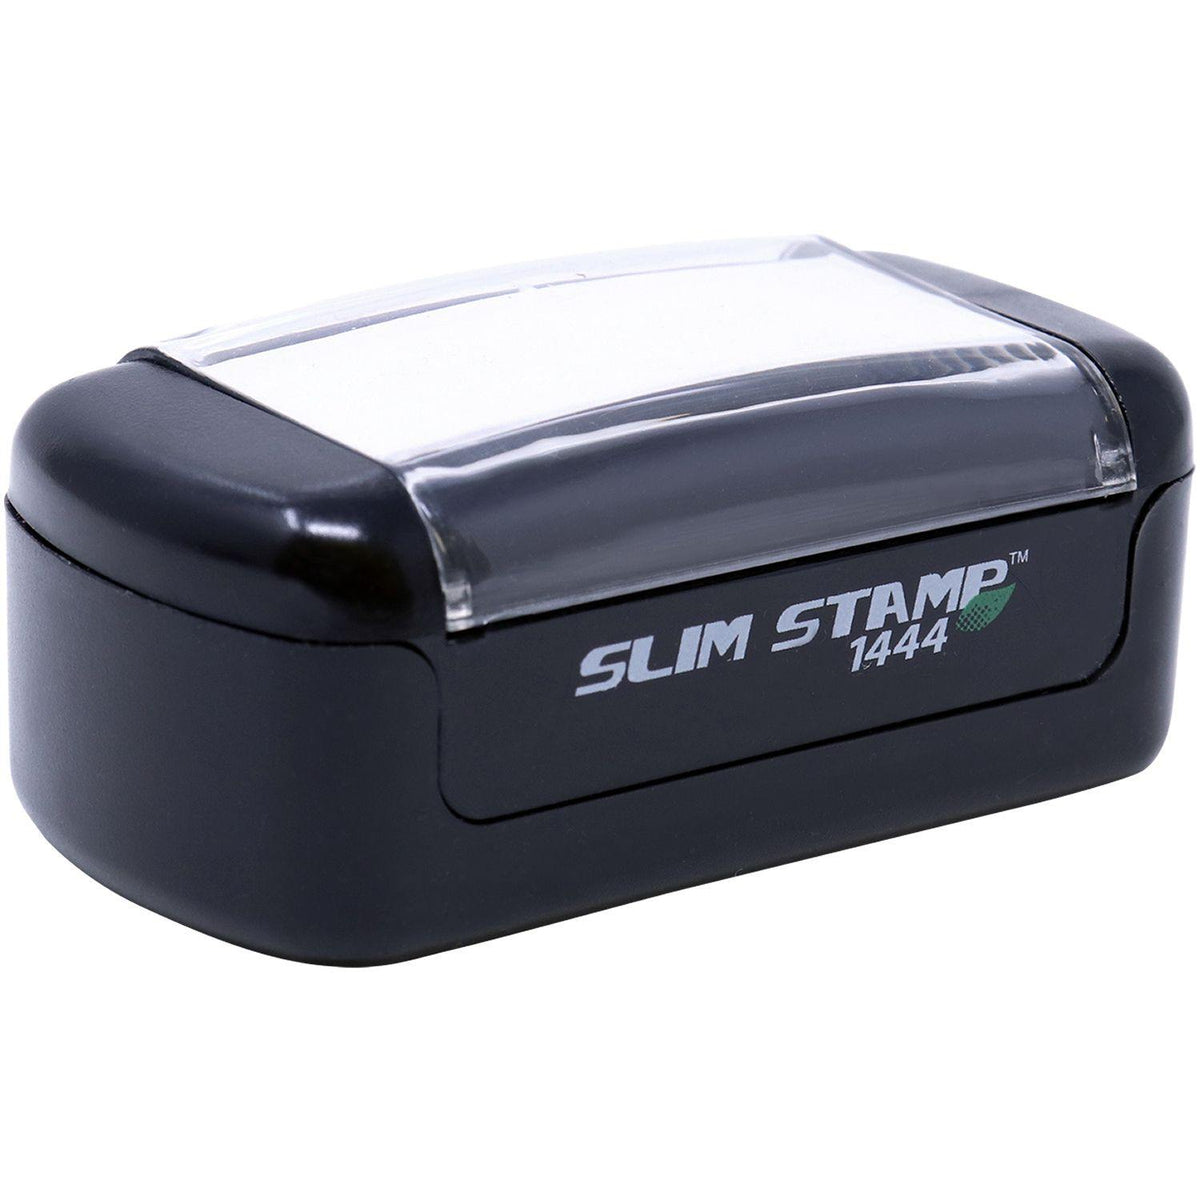 Alt View of Slim Pre-Inked Temporarily Away Stamp Mount Angle